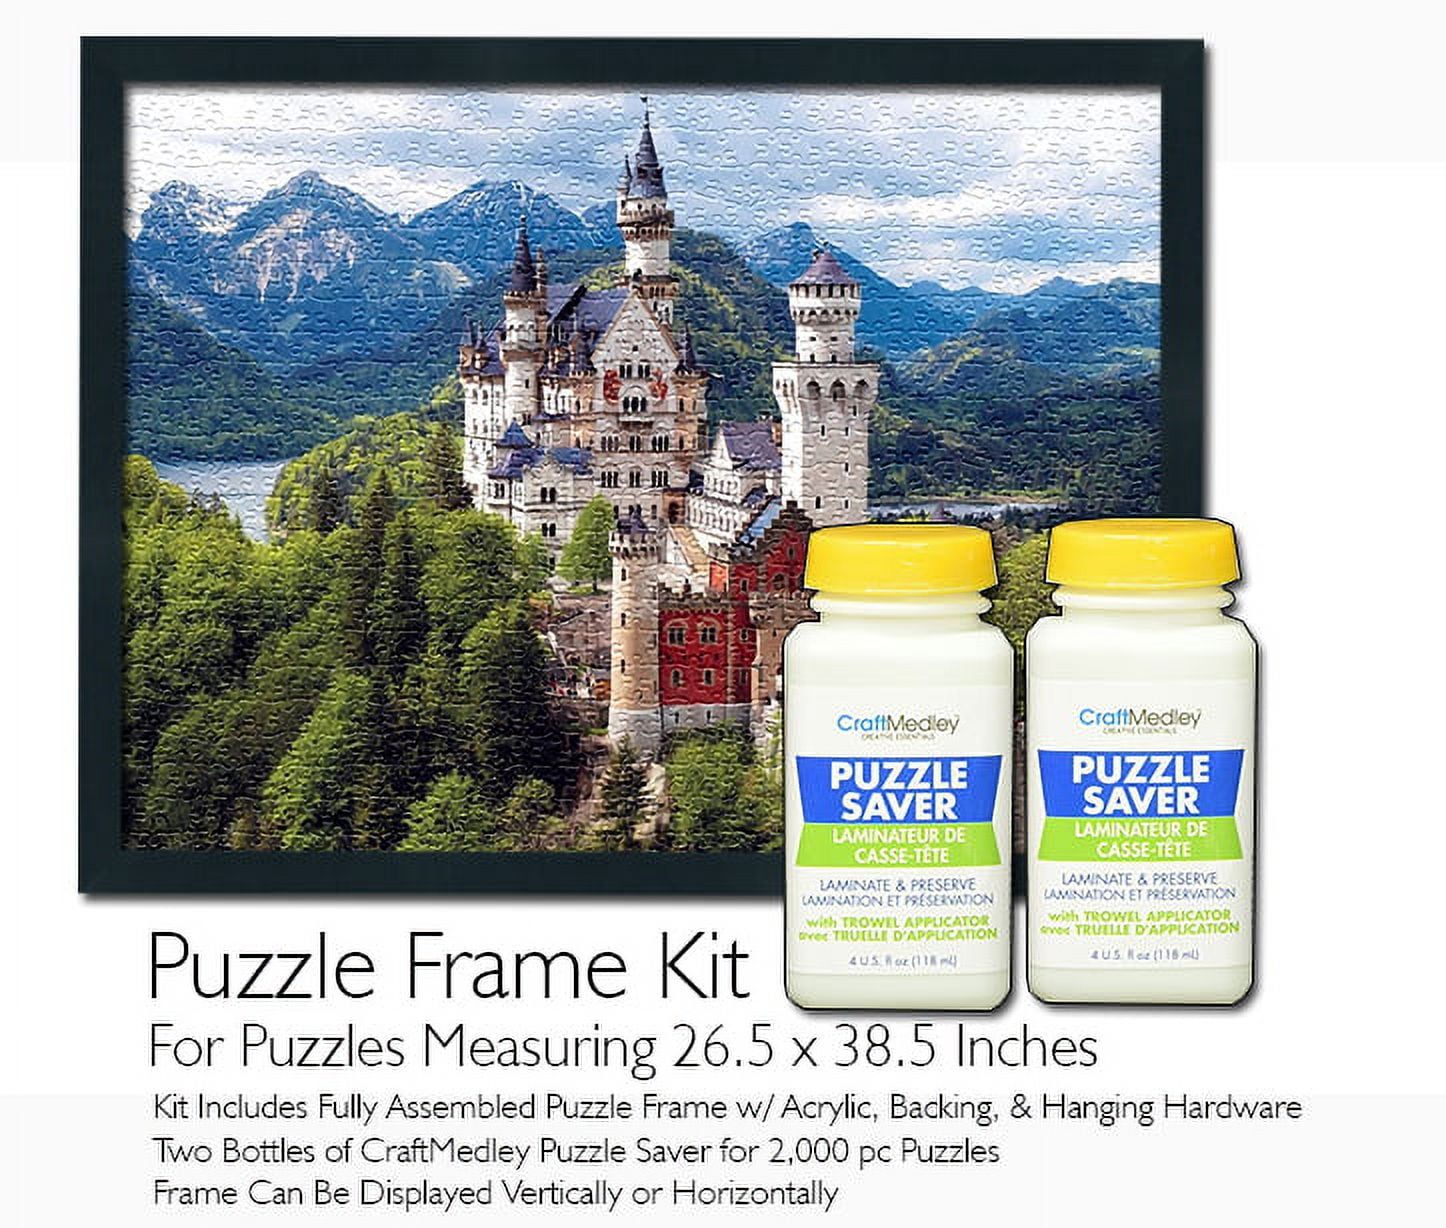 Mod Podge Jigsaw Puzzle Frame Kit - For Puzzles Measuring 21.25x15 inches 